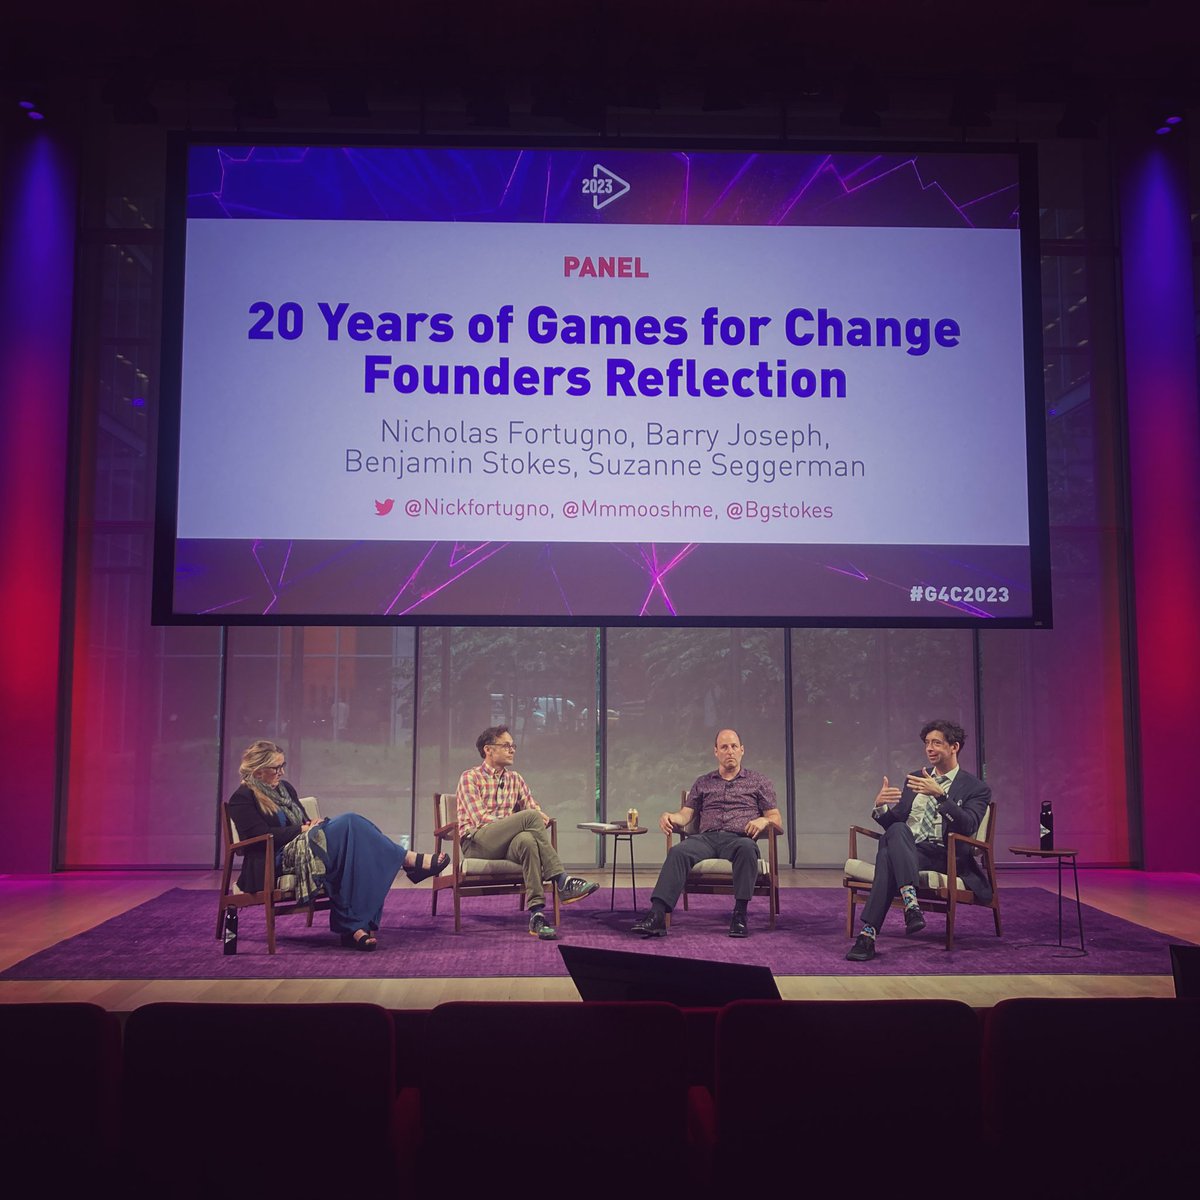 “Innovation happens at the intersections of disciplines. — education, government, and games.” Well said Ben. That’s why I love #G4C2023.